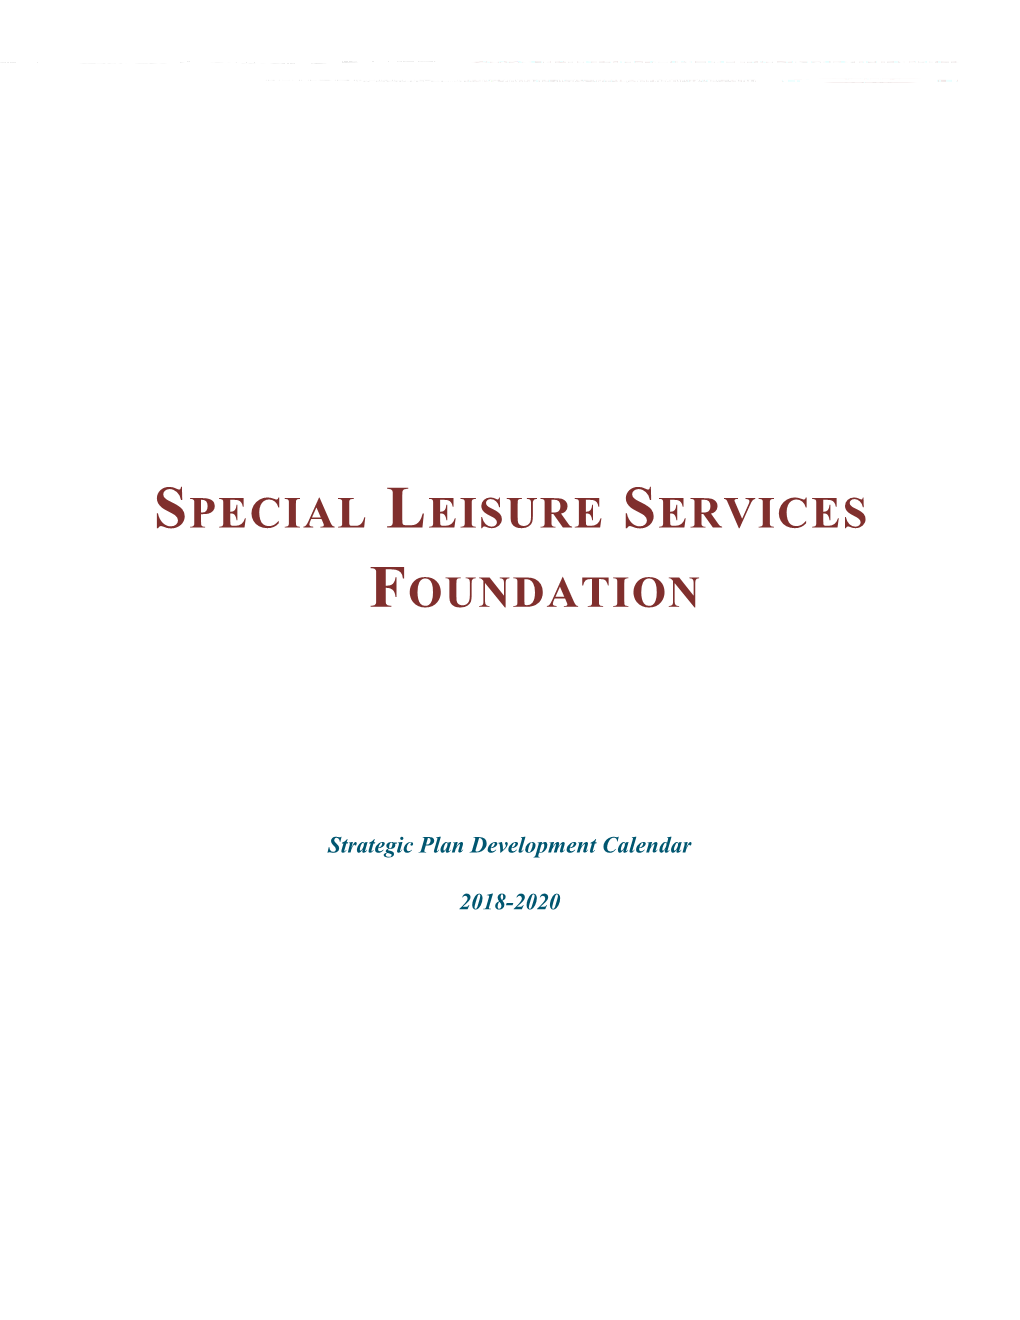 Special Leisure Services Foundation